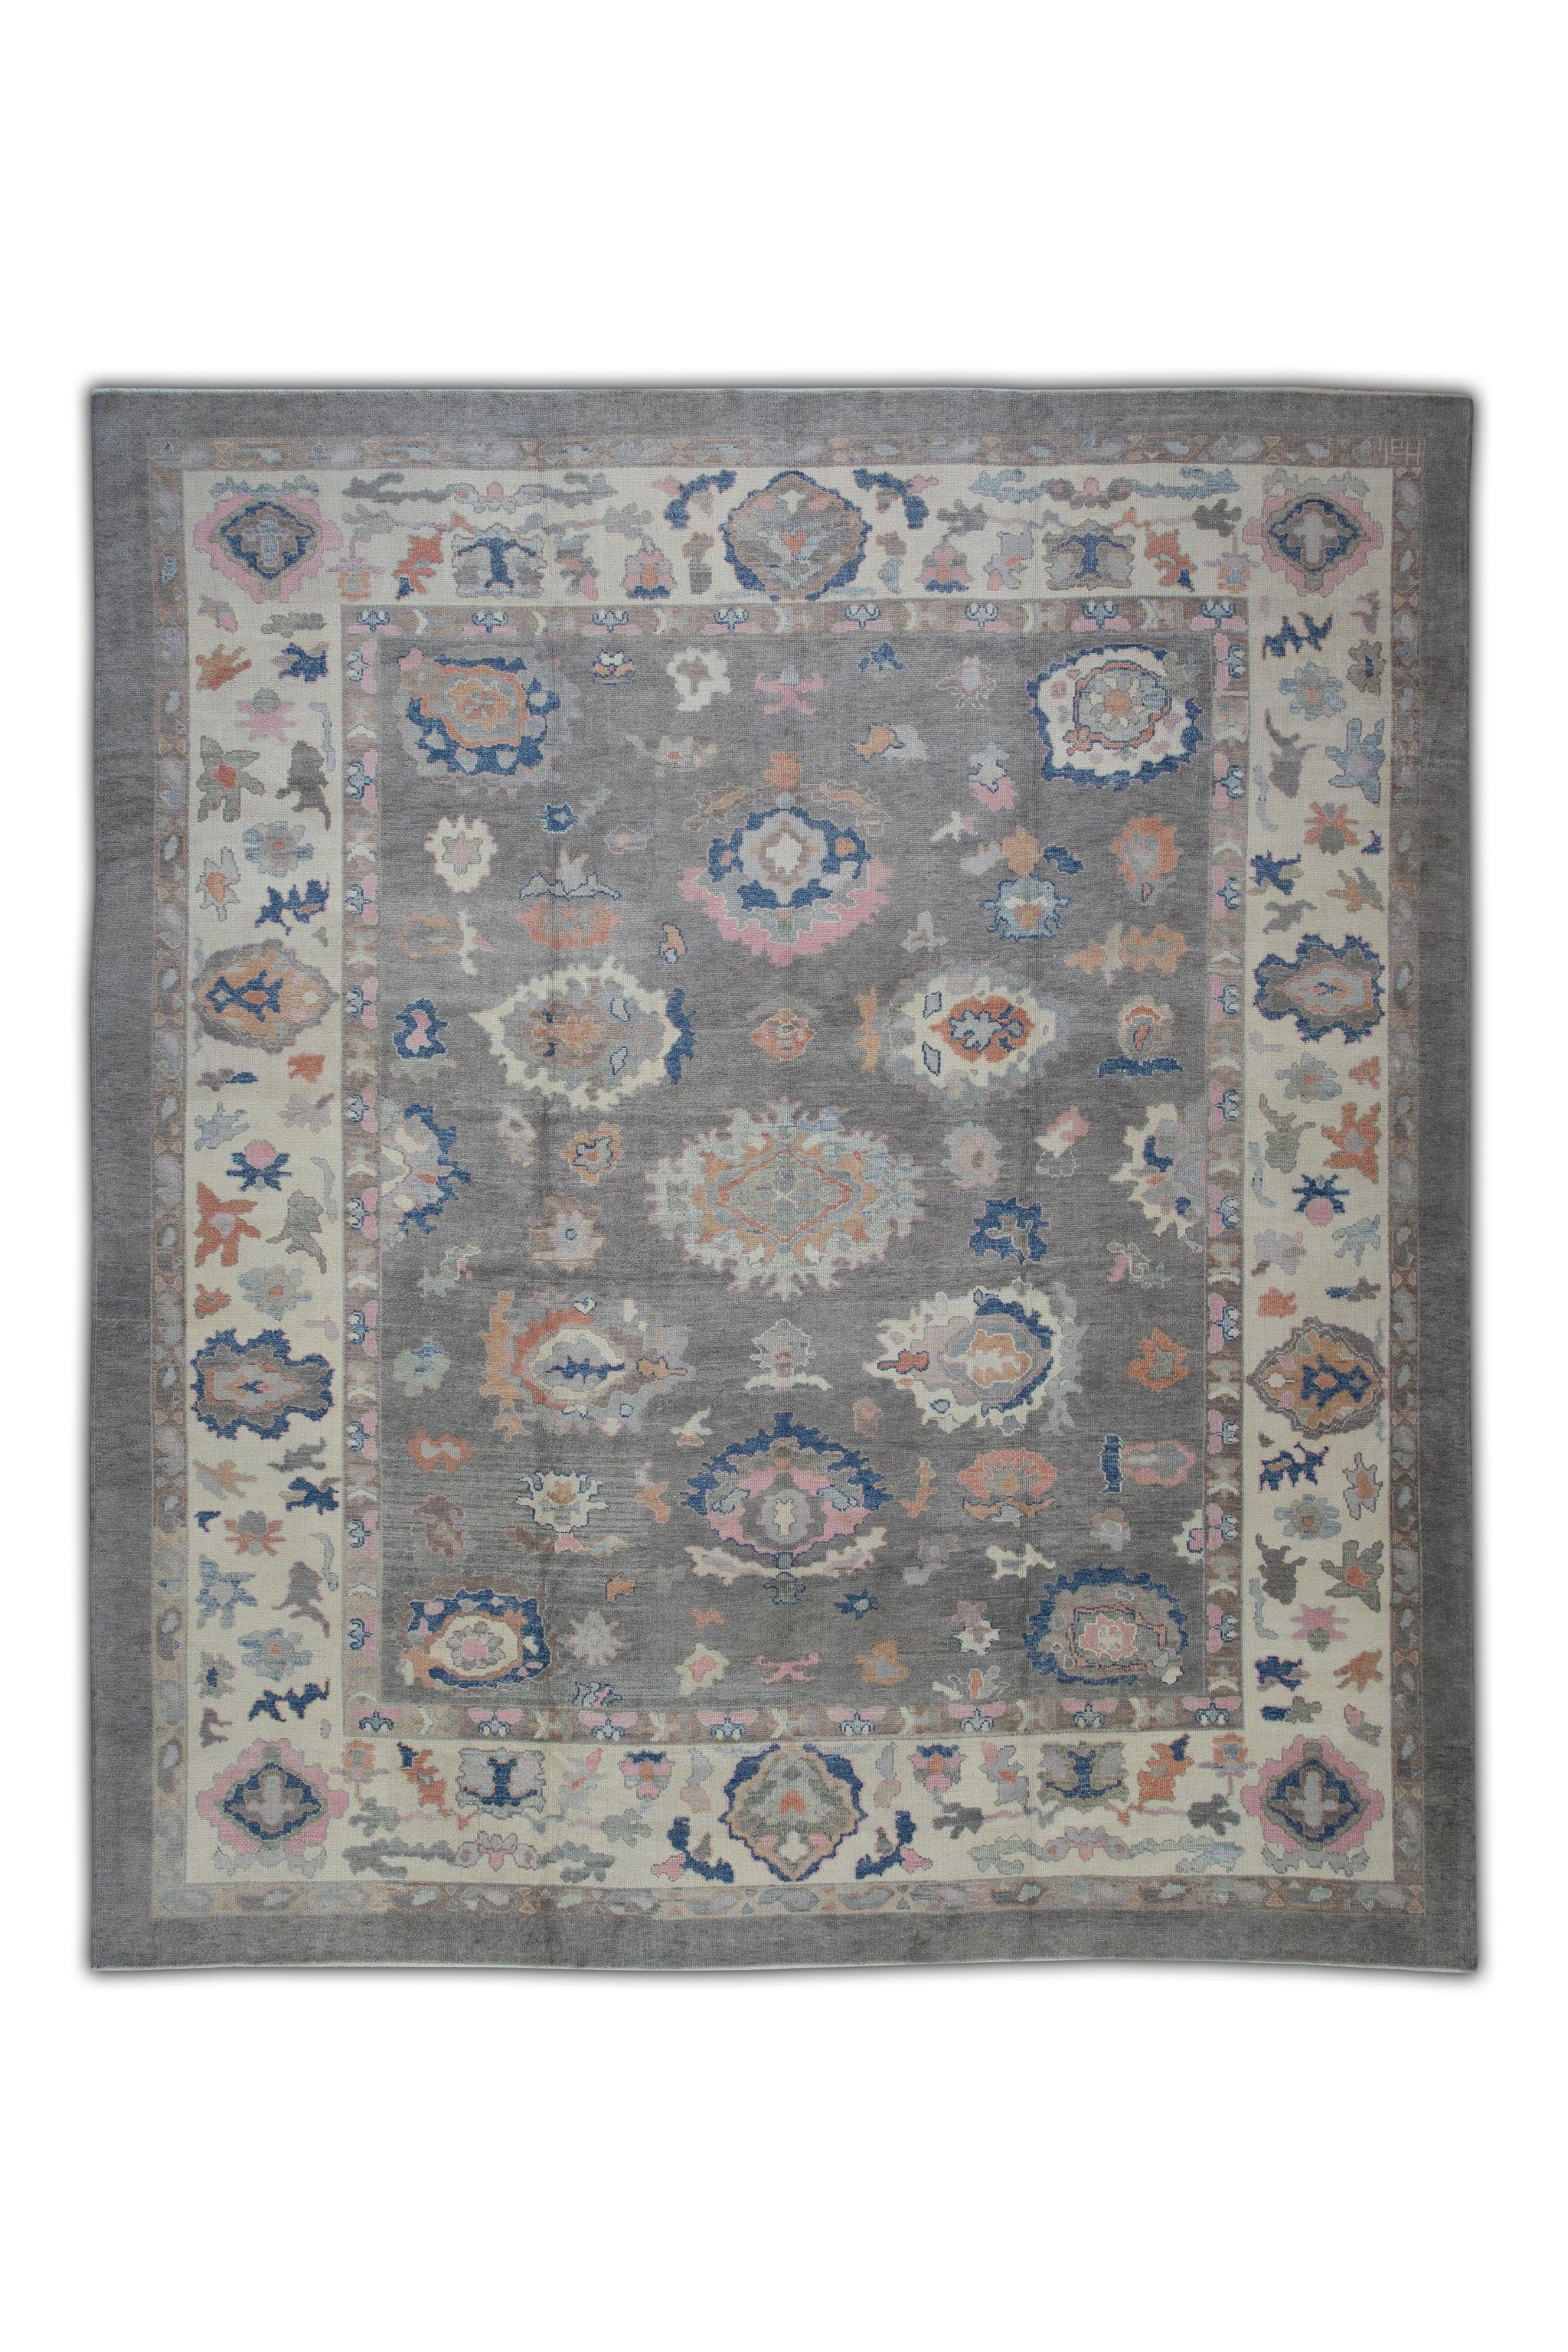 Contemporary Gray Multicolor Floral Handwoven Wool Oversized Turkish Oushak Rug 12'11